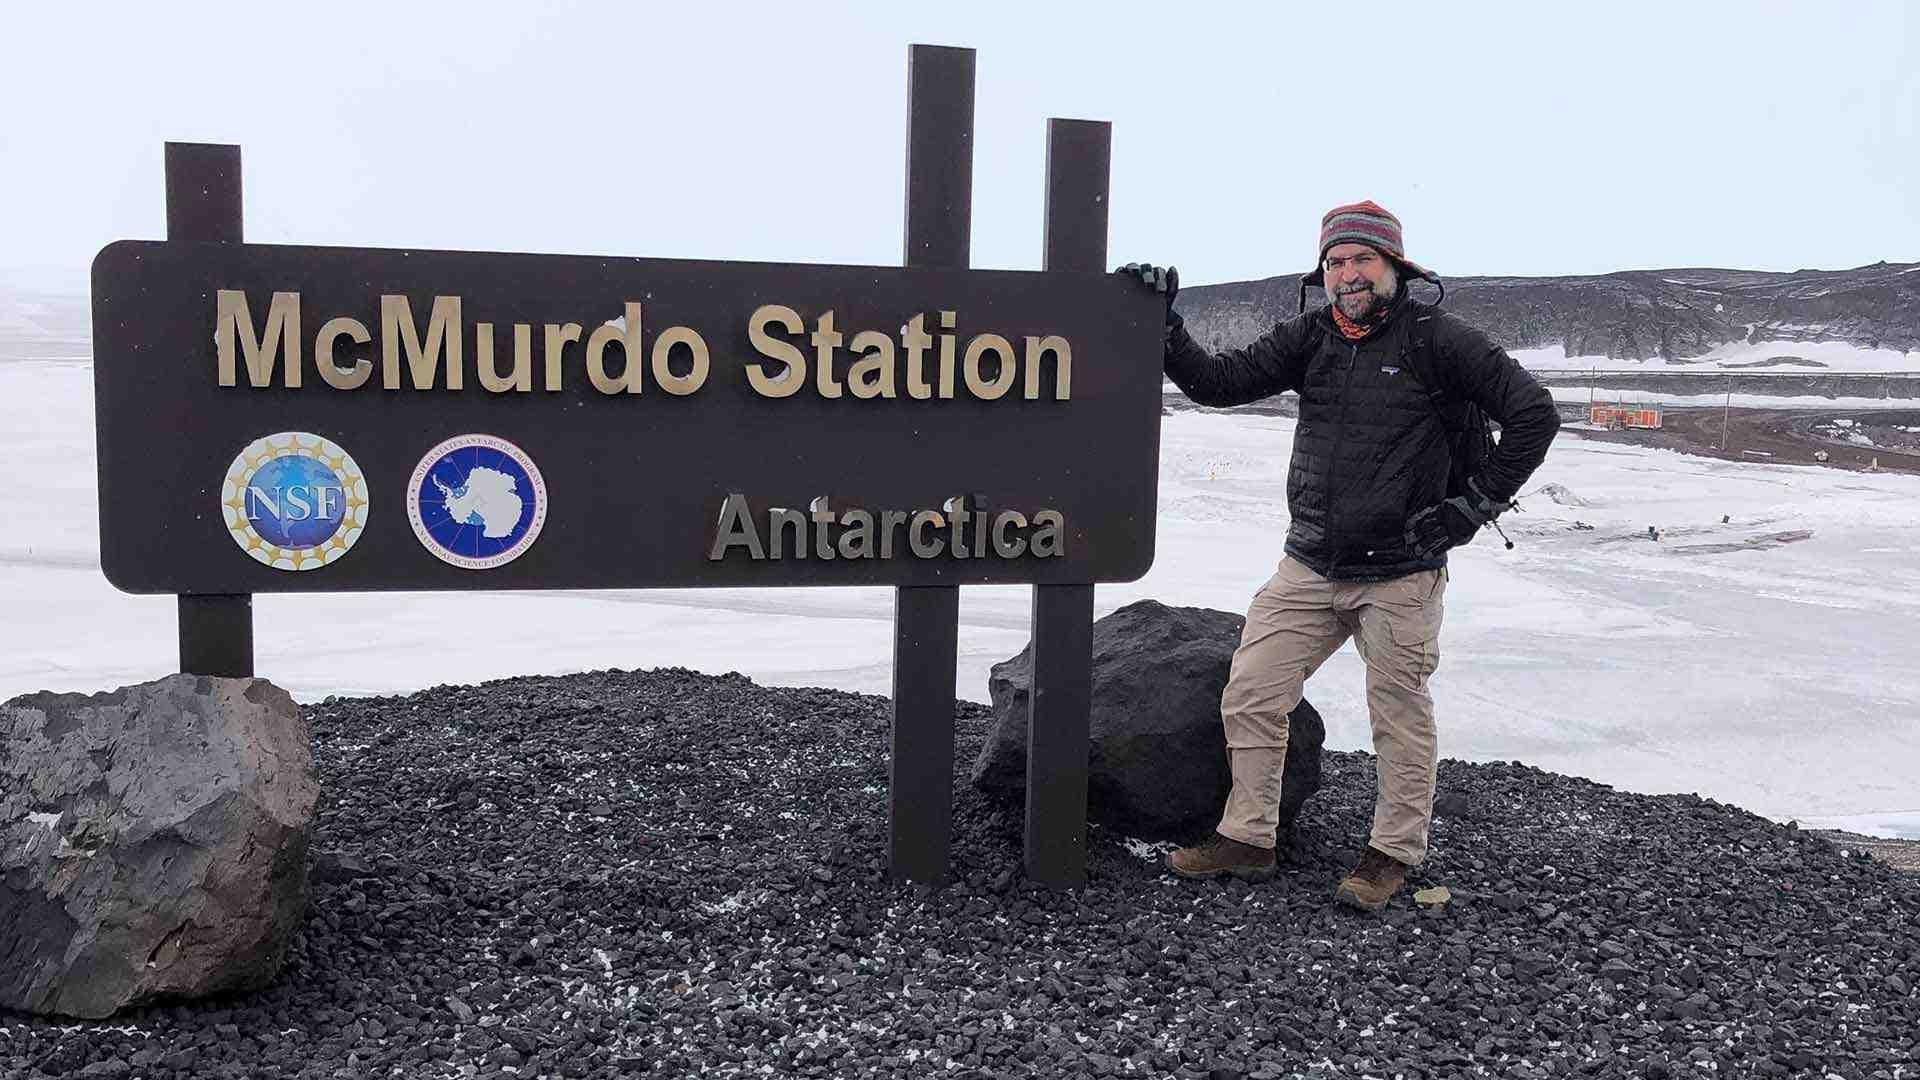 researcher poses next to McMurdo Station, Antarctica sign